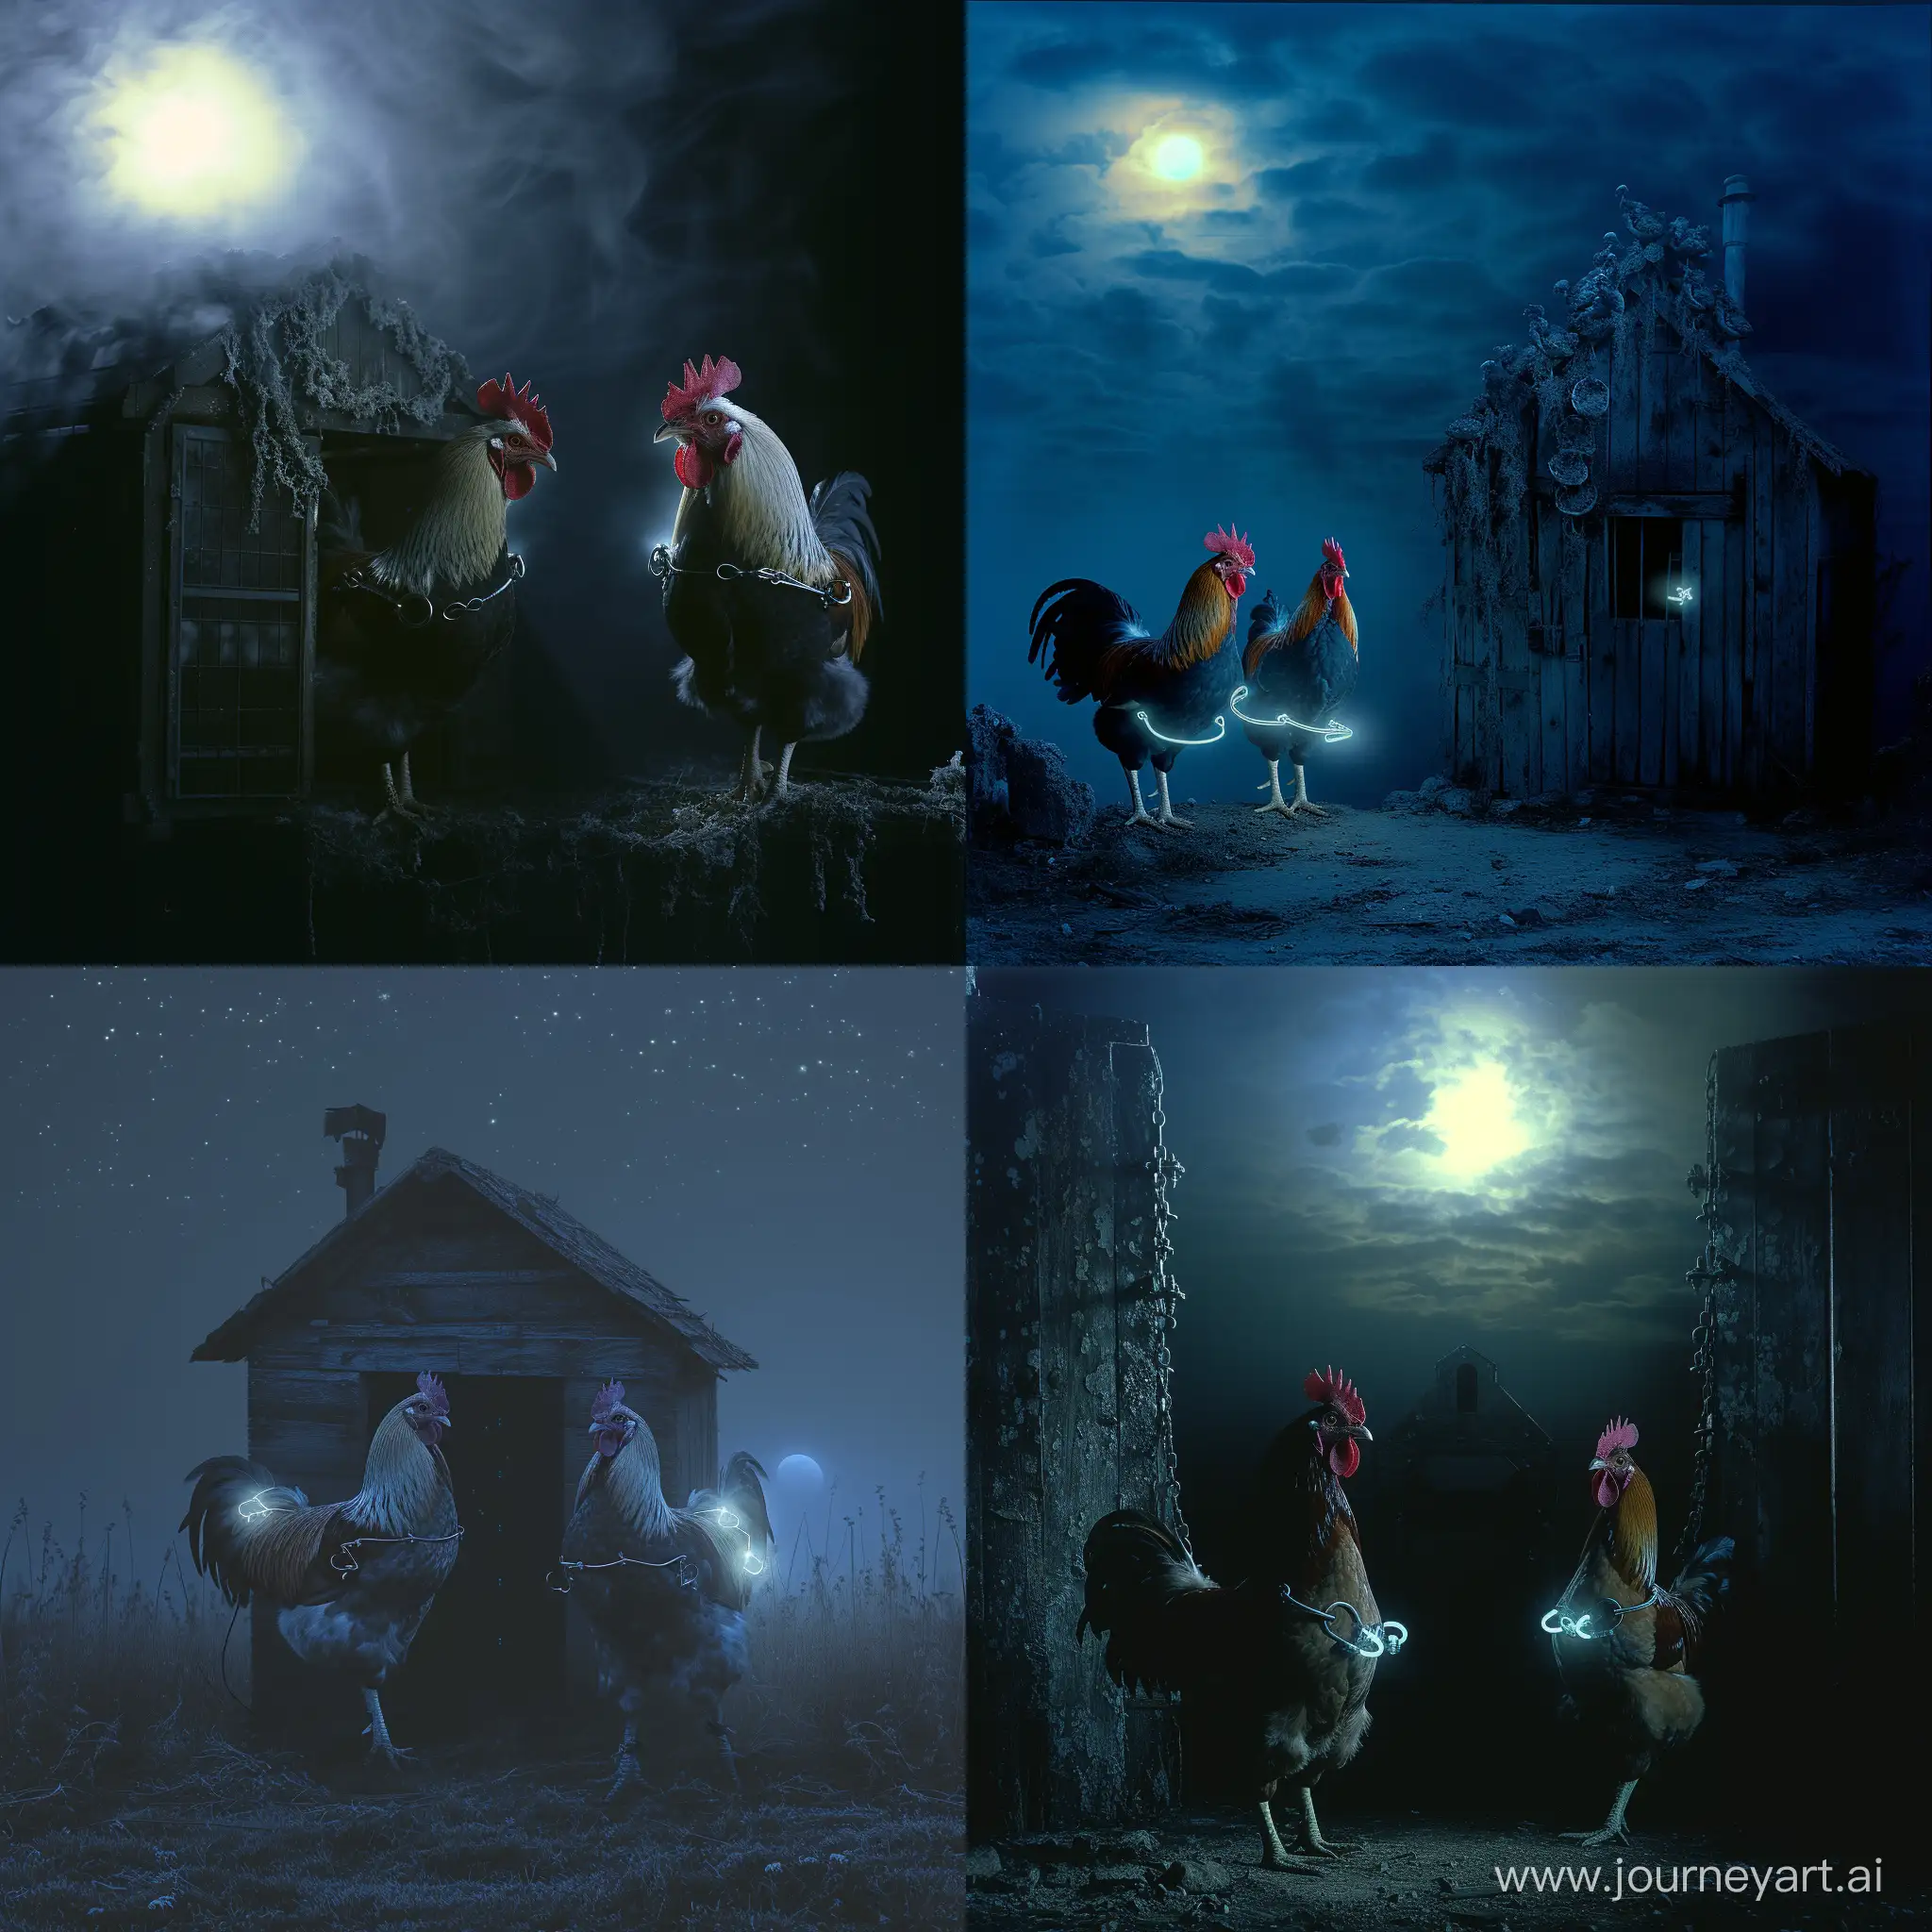 Under the moonlit sky, a mystical chicken coop emerges from the shadows. Two roosters, bound by ethereal handcuffs that emit a soft glow, stand with a regal demeanor. The surreal atmosphere adds an element of mystery to the scene, inviting viewers to ponder the story behind the enchanted coop and the captive roosters.